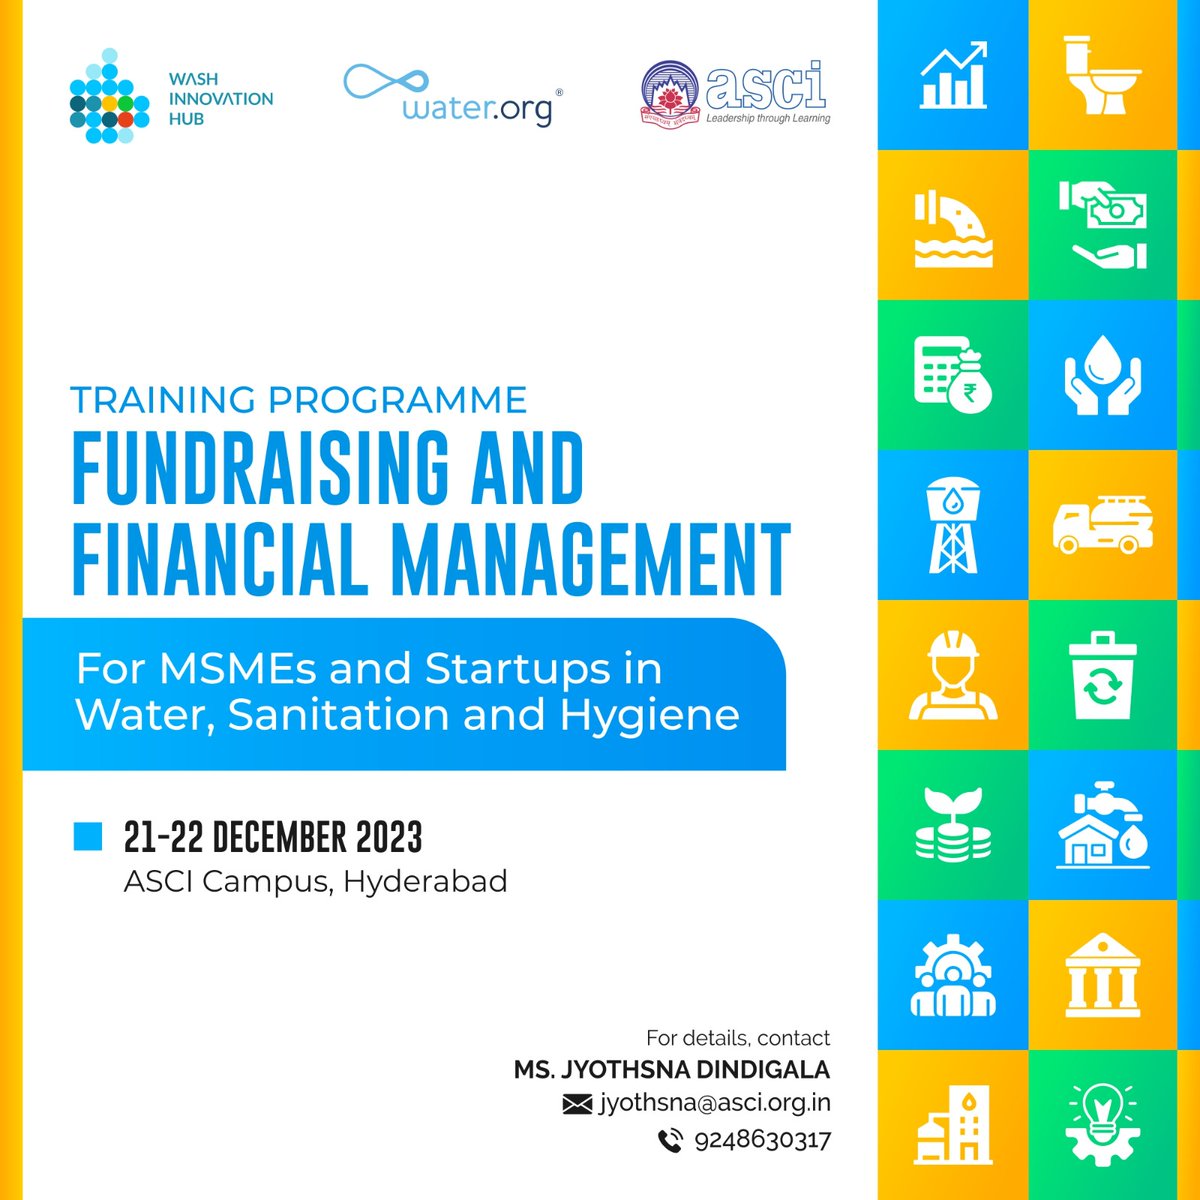 Calling startups & MSMEs in the #WASH sector to join the training programme on Fundraising & Financial Management. Please send your nominations to jyothsna@asci.org.in or register on the link tinyurl.com/5f4c4pwd This is a fully funded programme! Register NOW! #fundraising